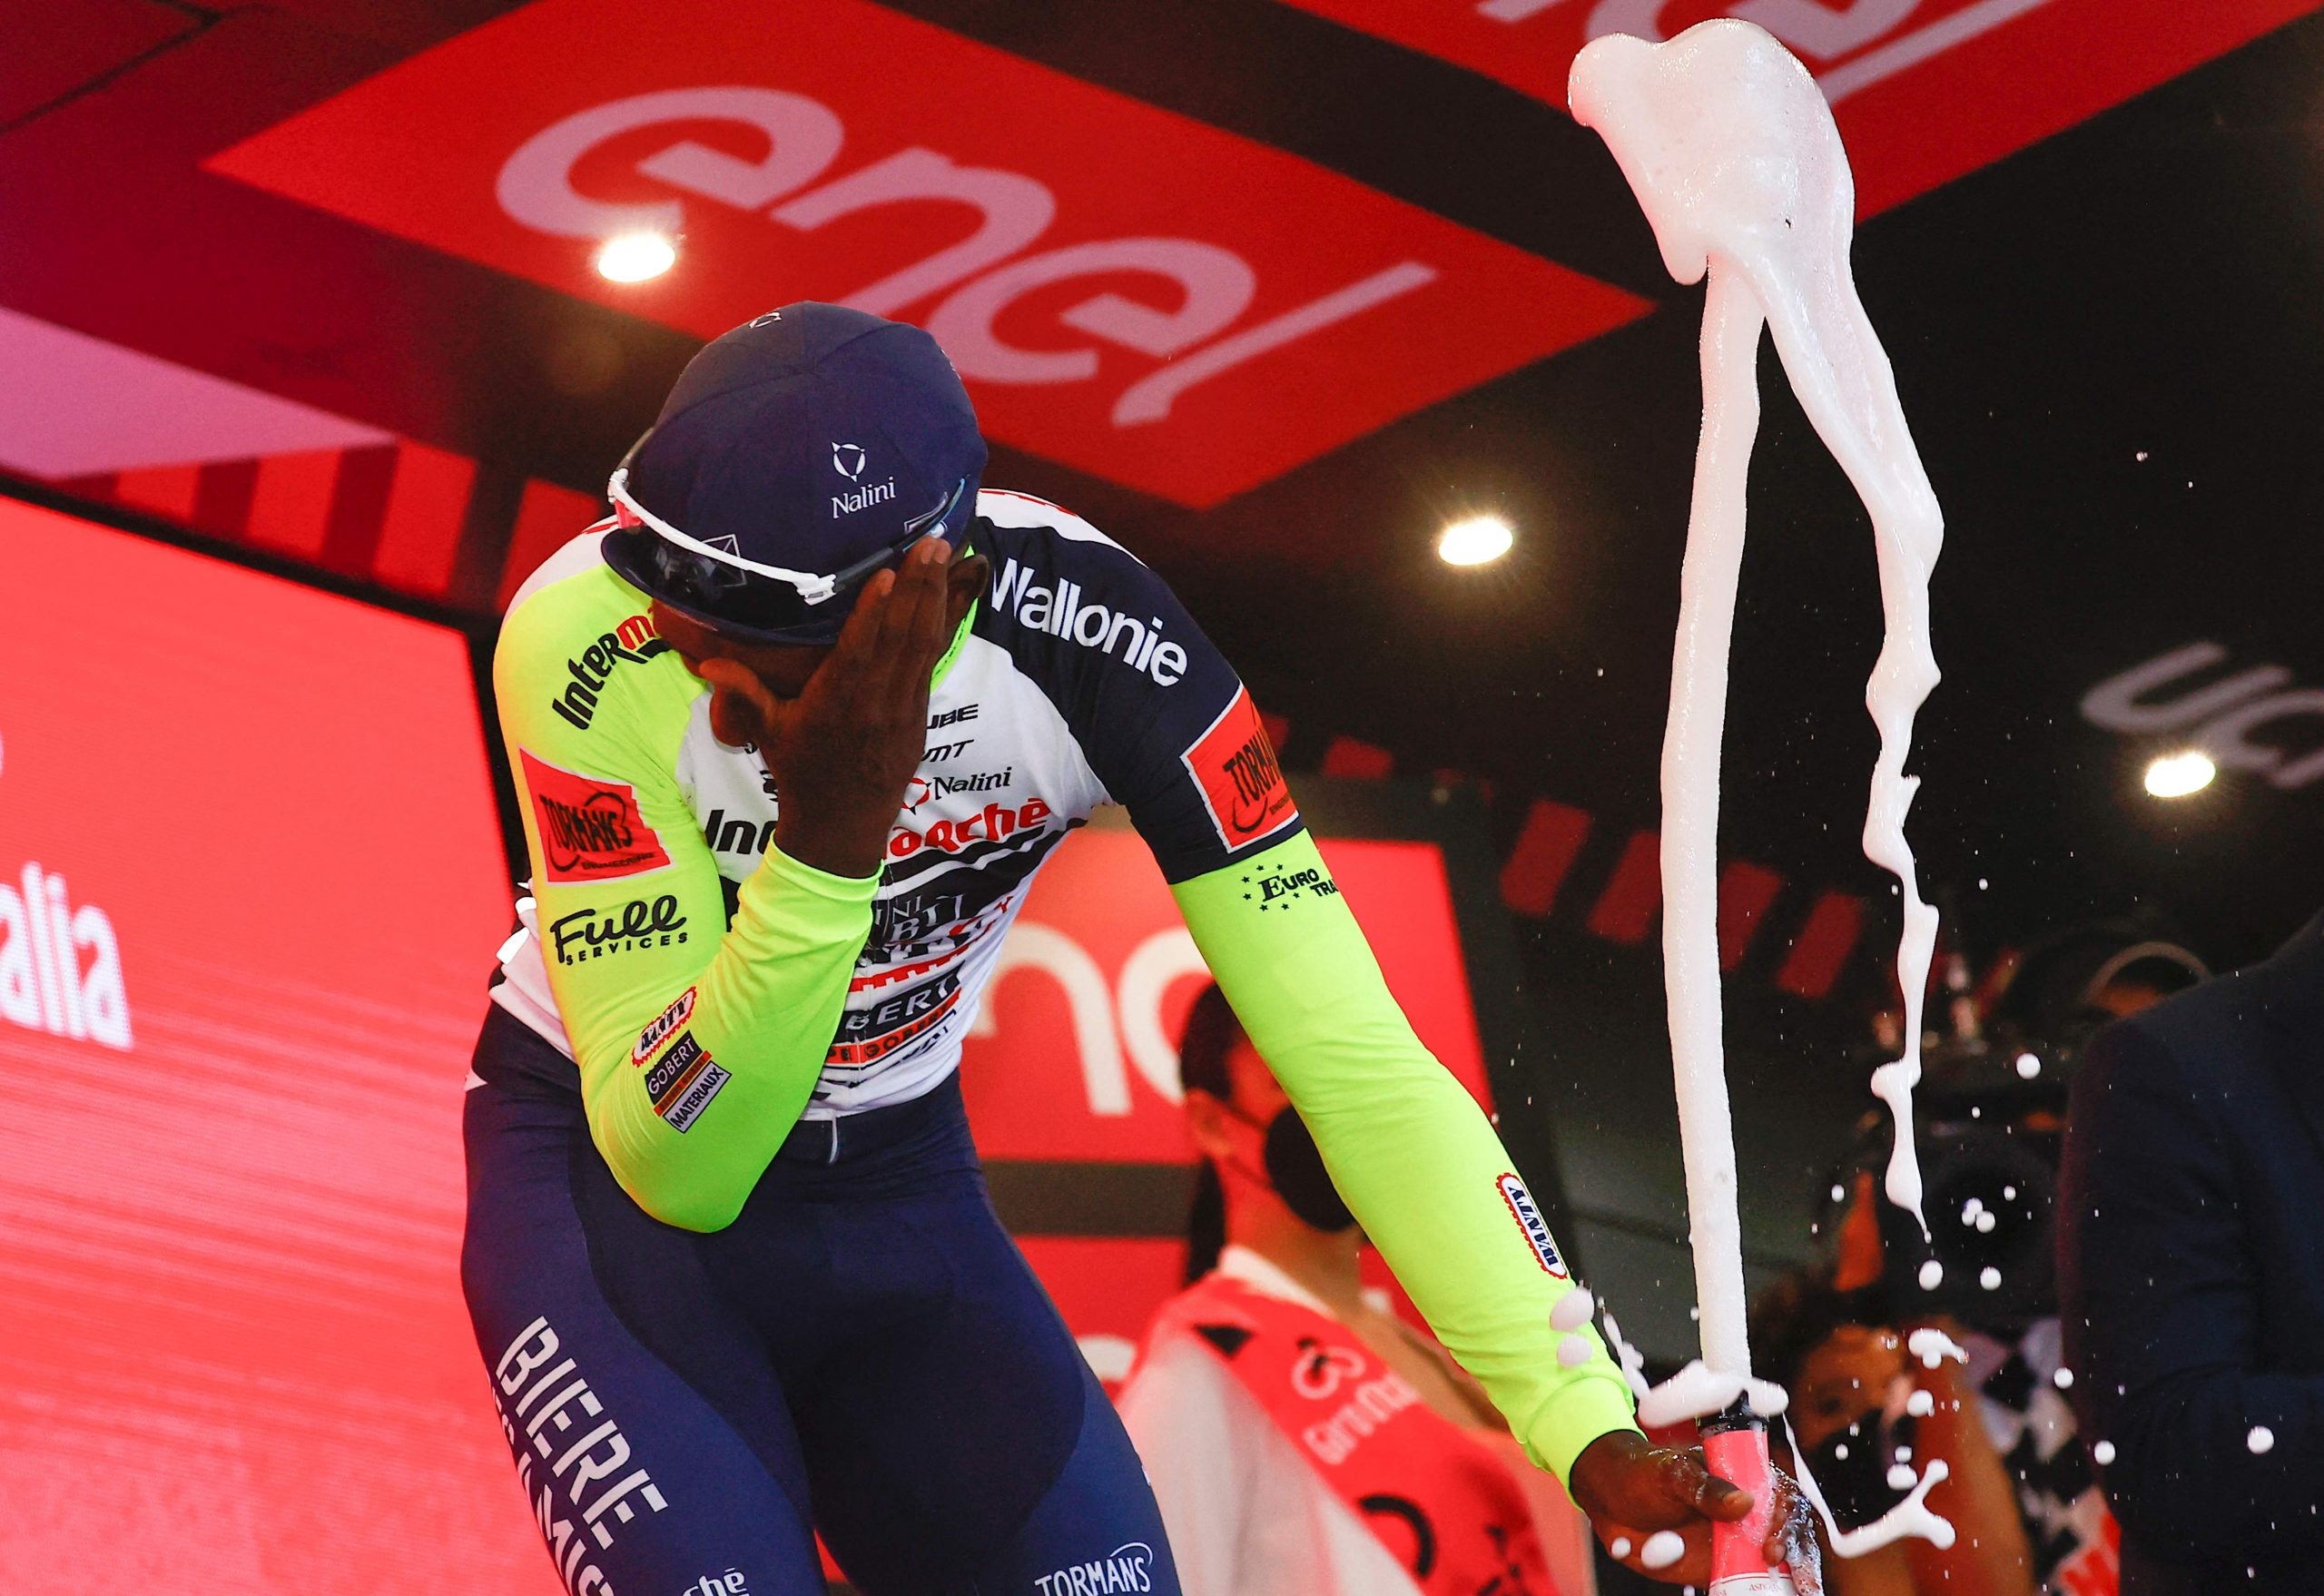 Eritrean rider Biniam Girmay Hailu reacts after popping a champagne cork as he celebrates on the podium after winning the 10th stage of the Giro d'Italia 2022 cycling race. 